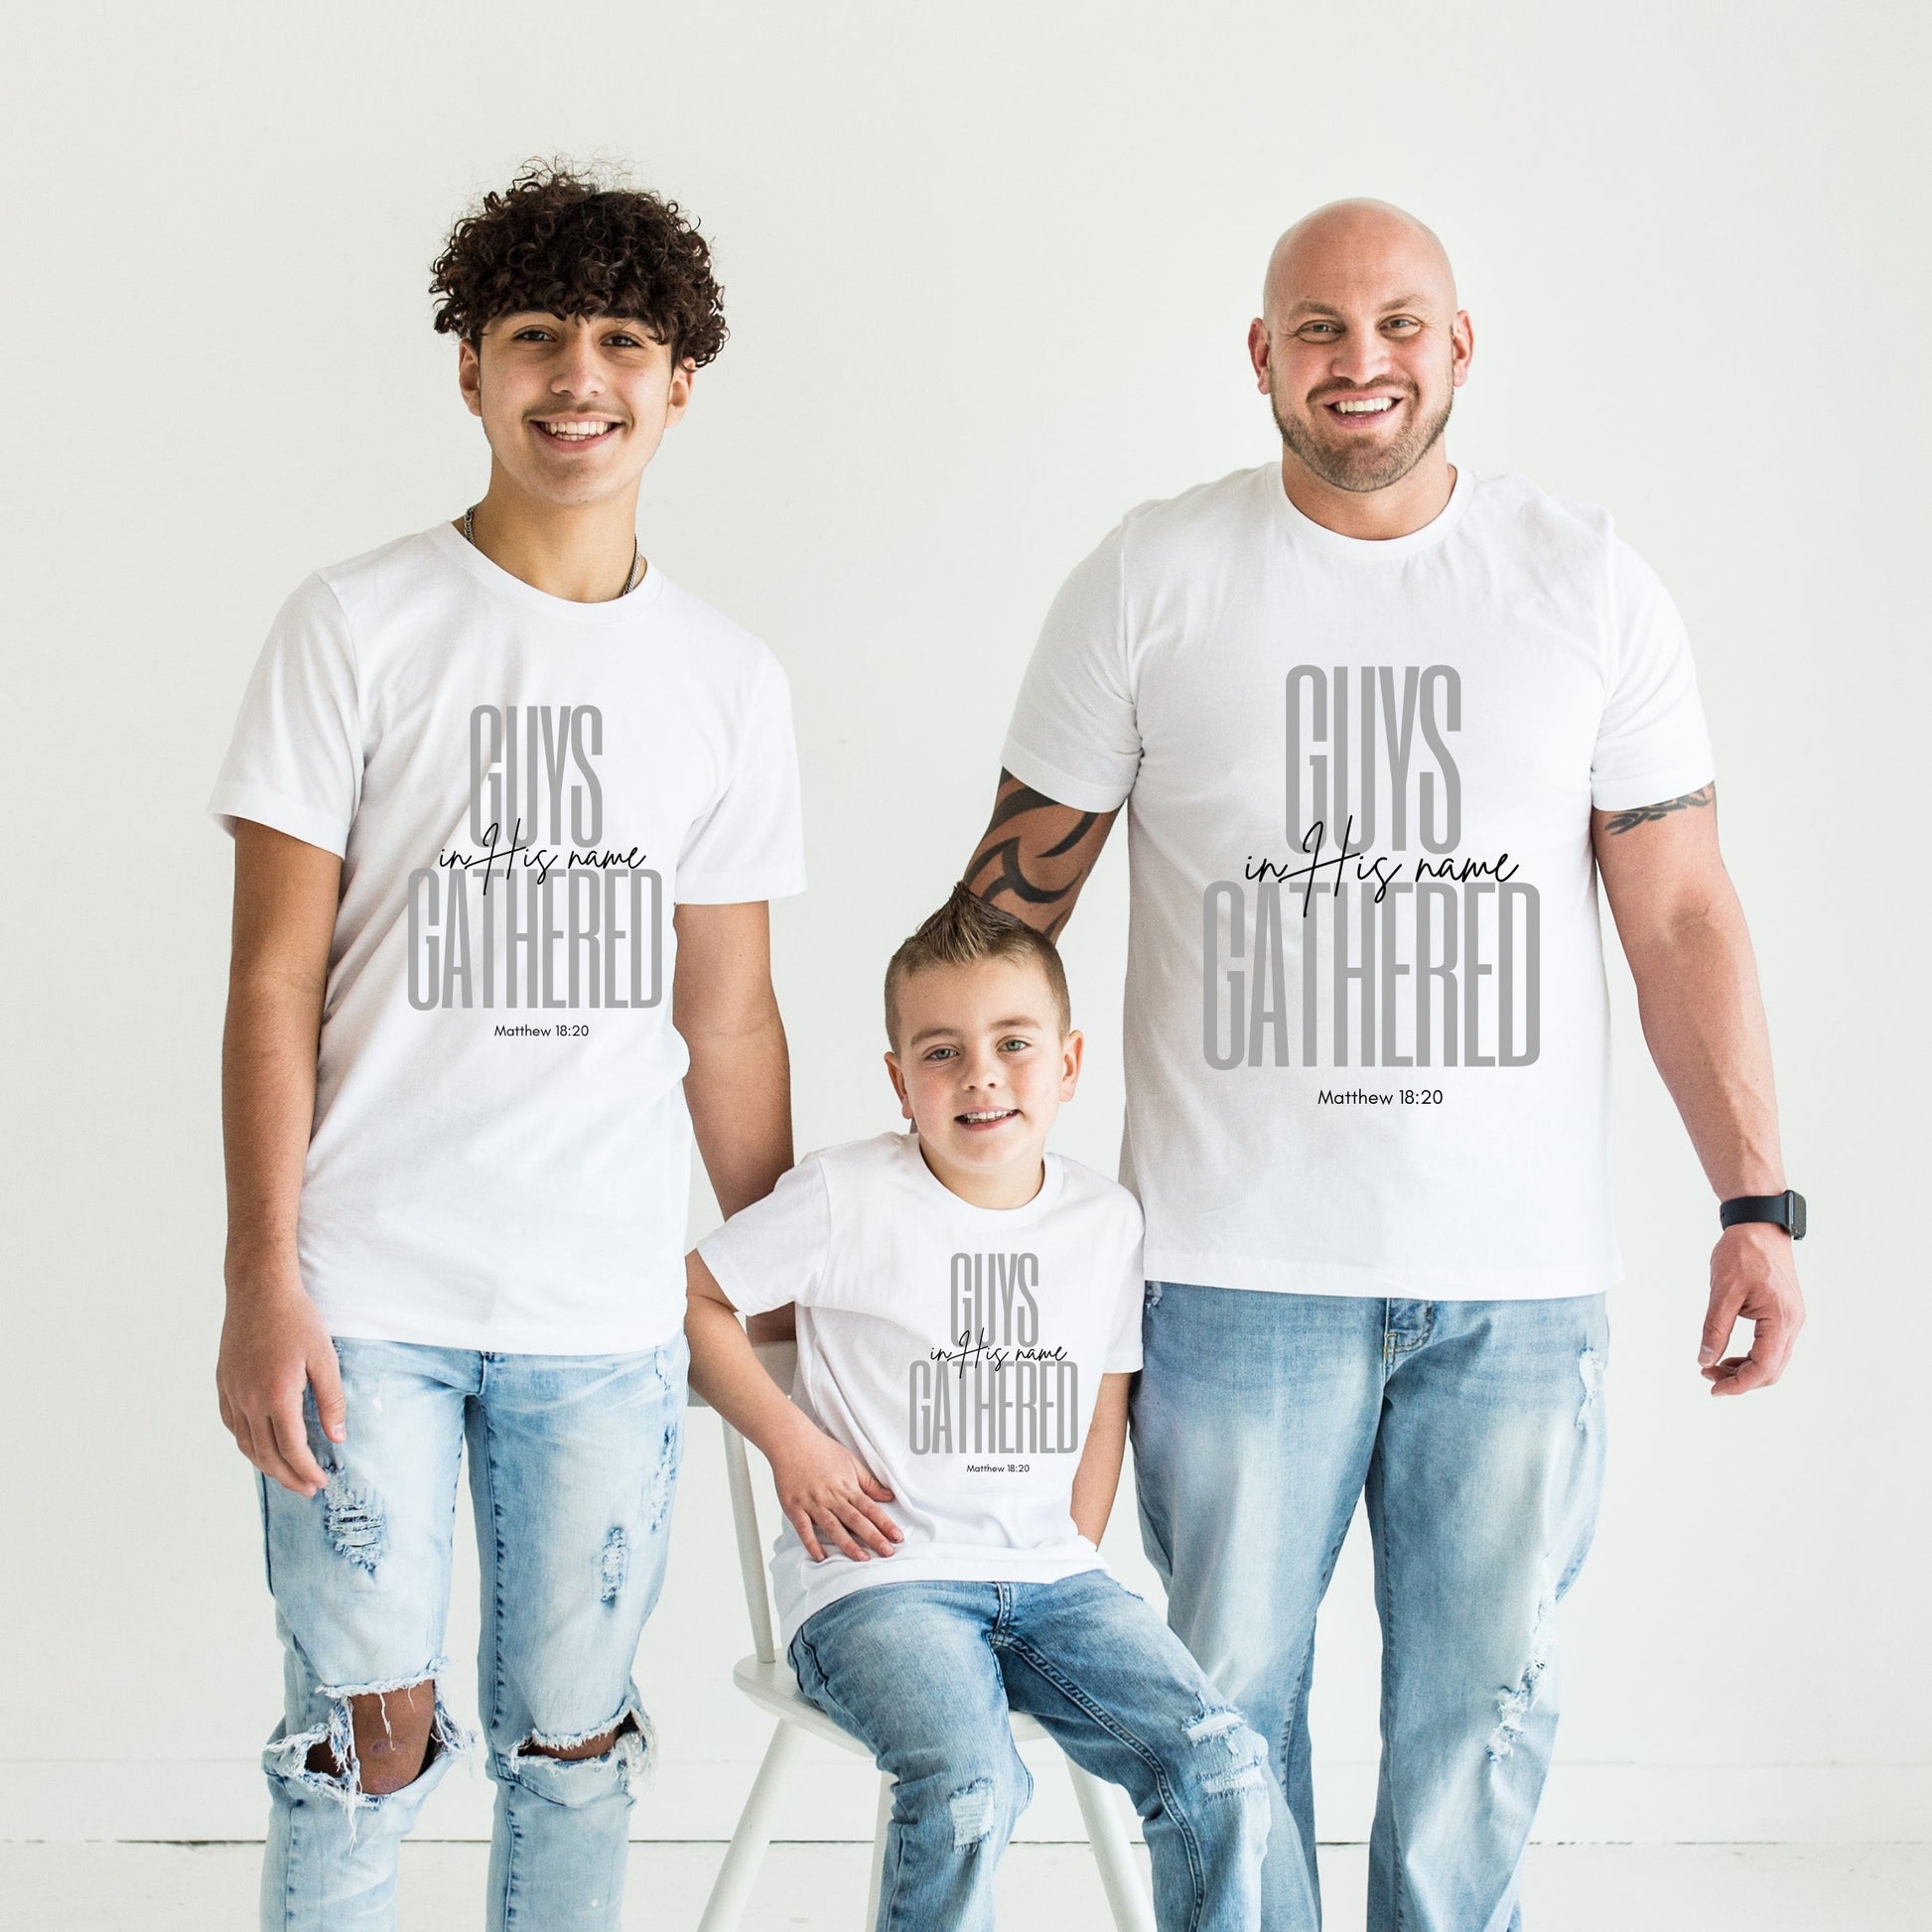 A small Life Group for kids leader and 2 boy members wearing matching t-shirts.